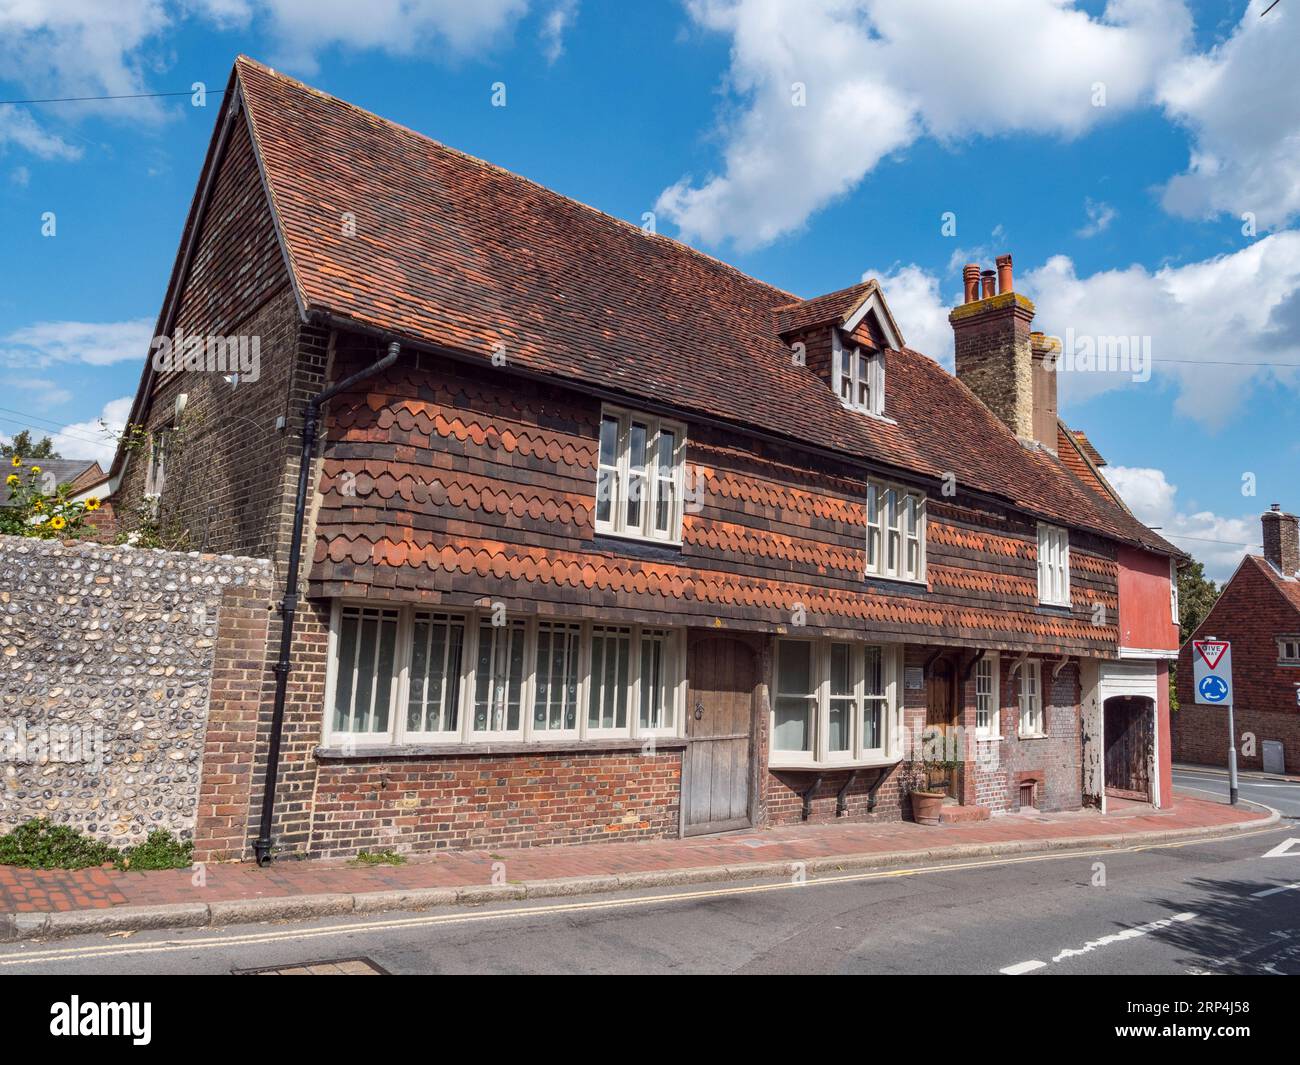 Southover Forge, a house built in the 13th Century and became a forge in 1637 until 1980s, Southover High Street, Lewes, East Sussex, UK. Stock Photo